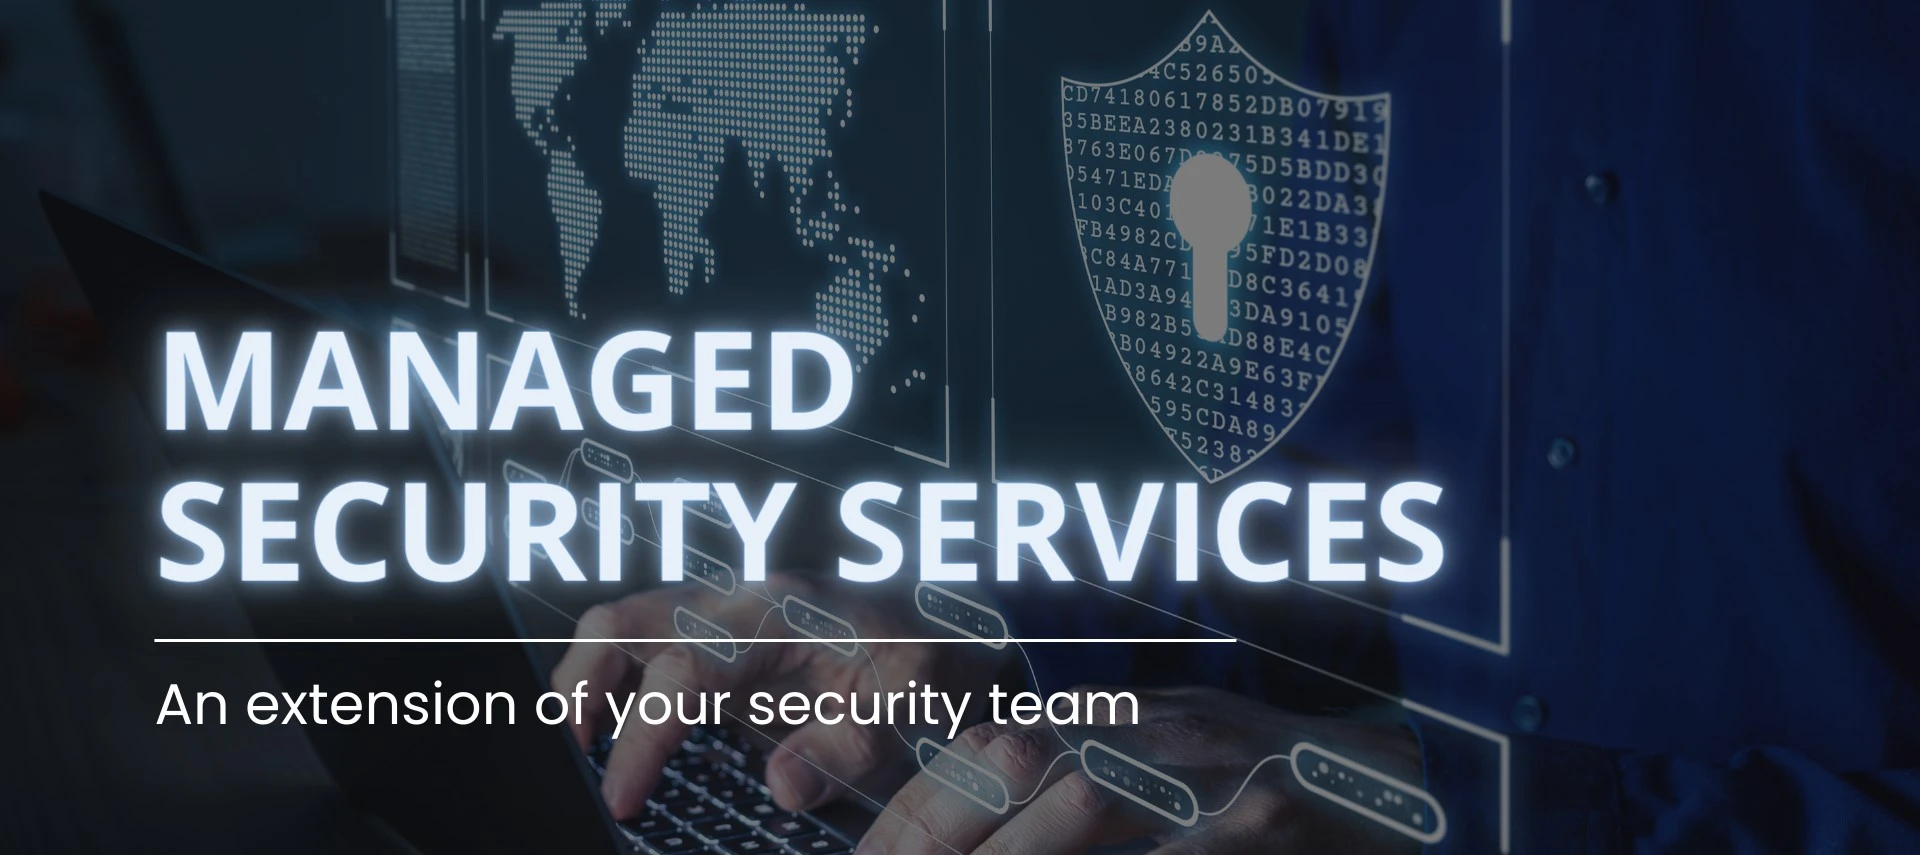 Managed Cyber Security Service Company in Dubai